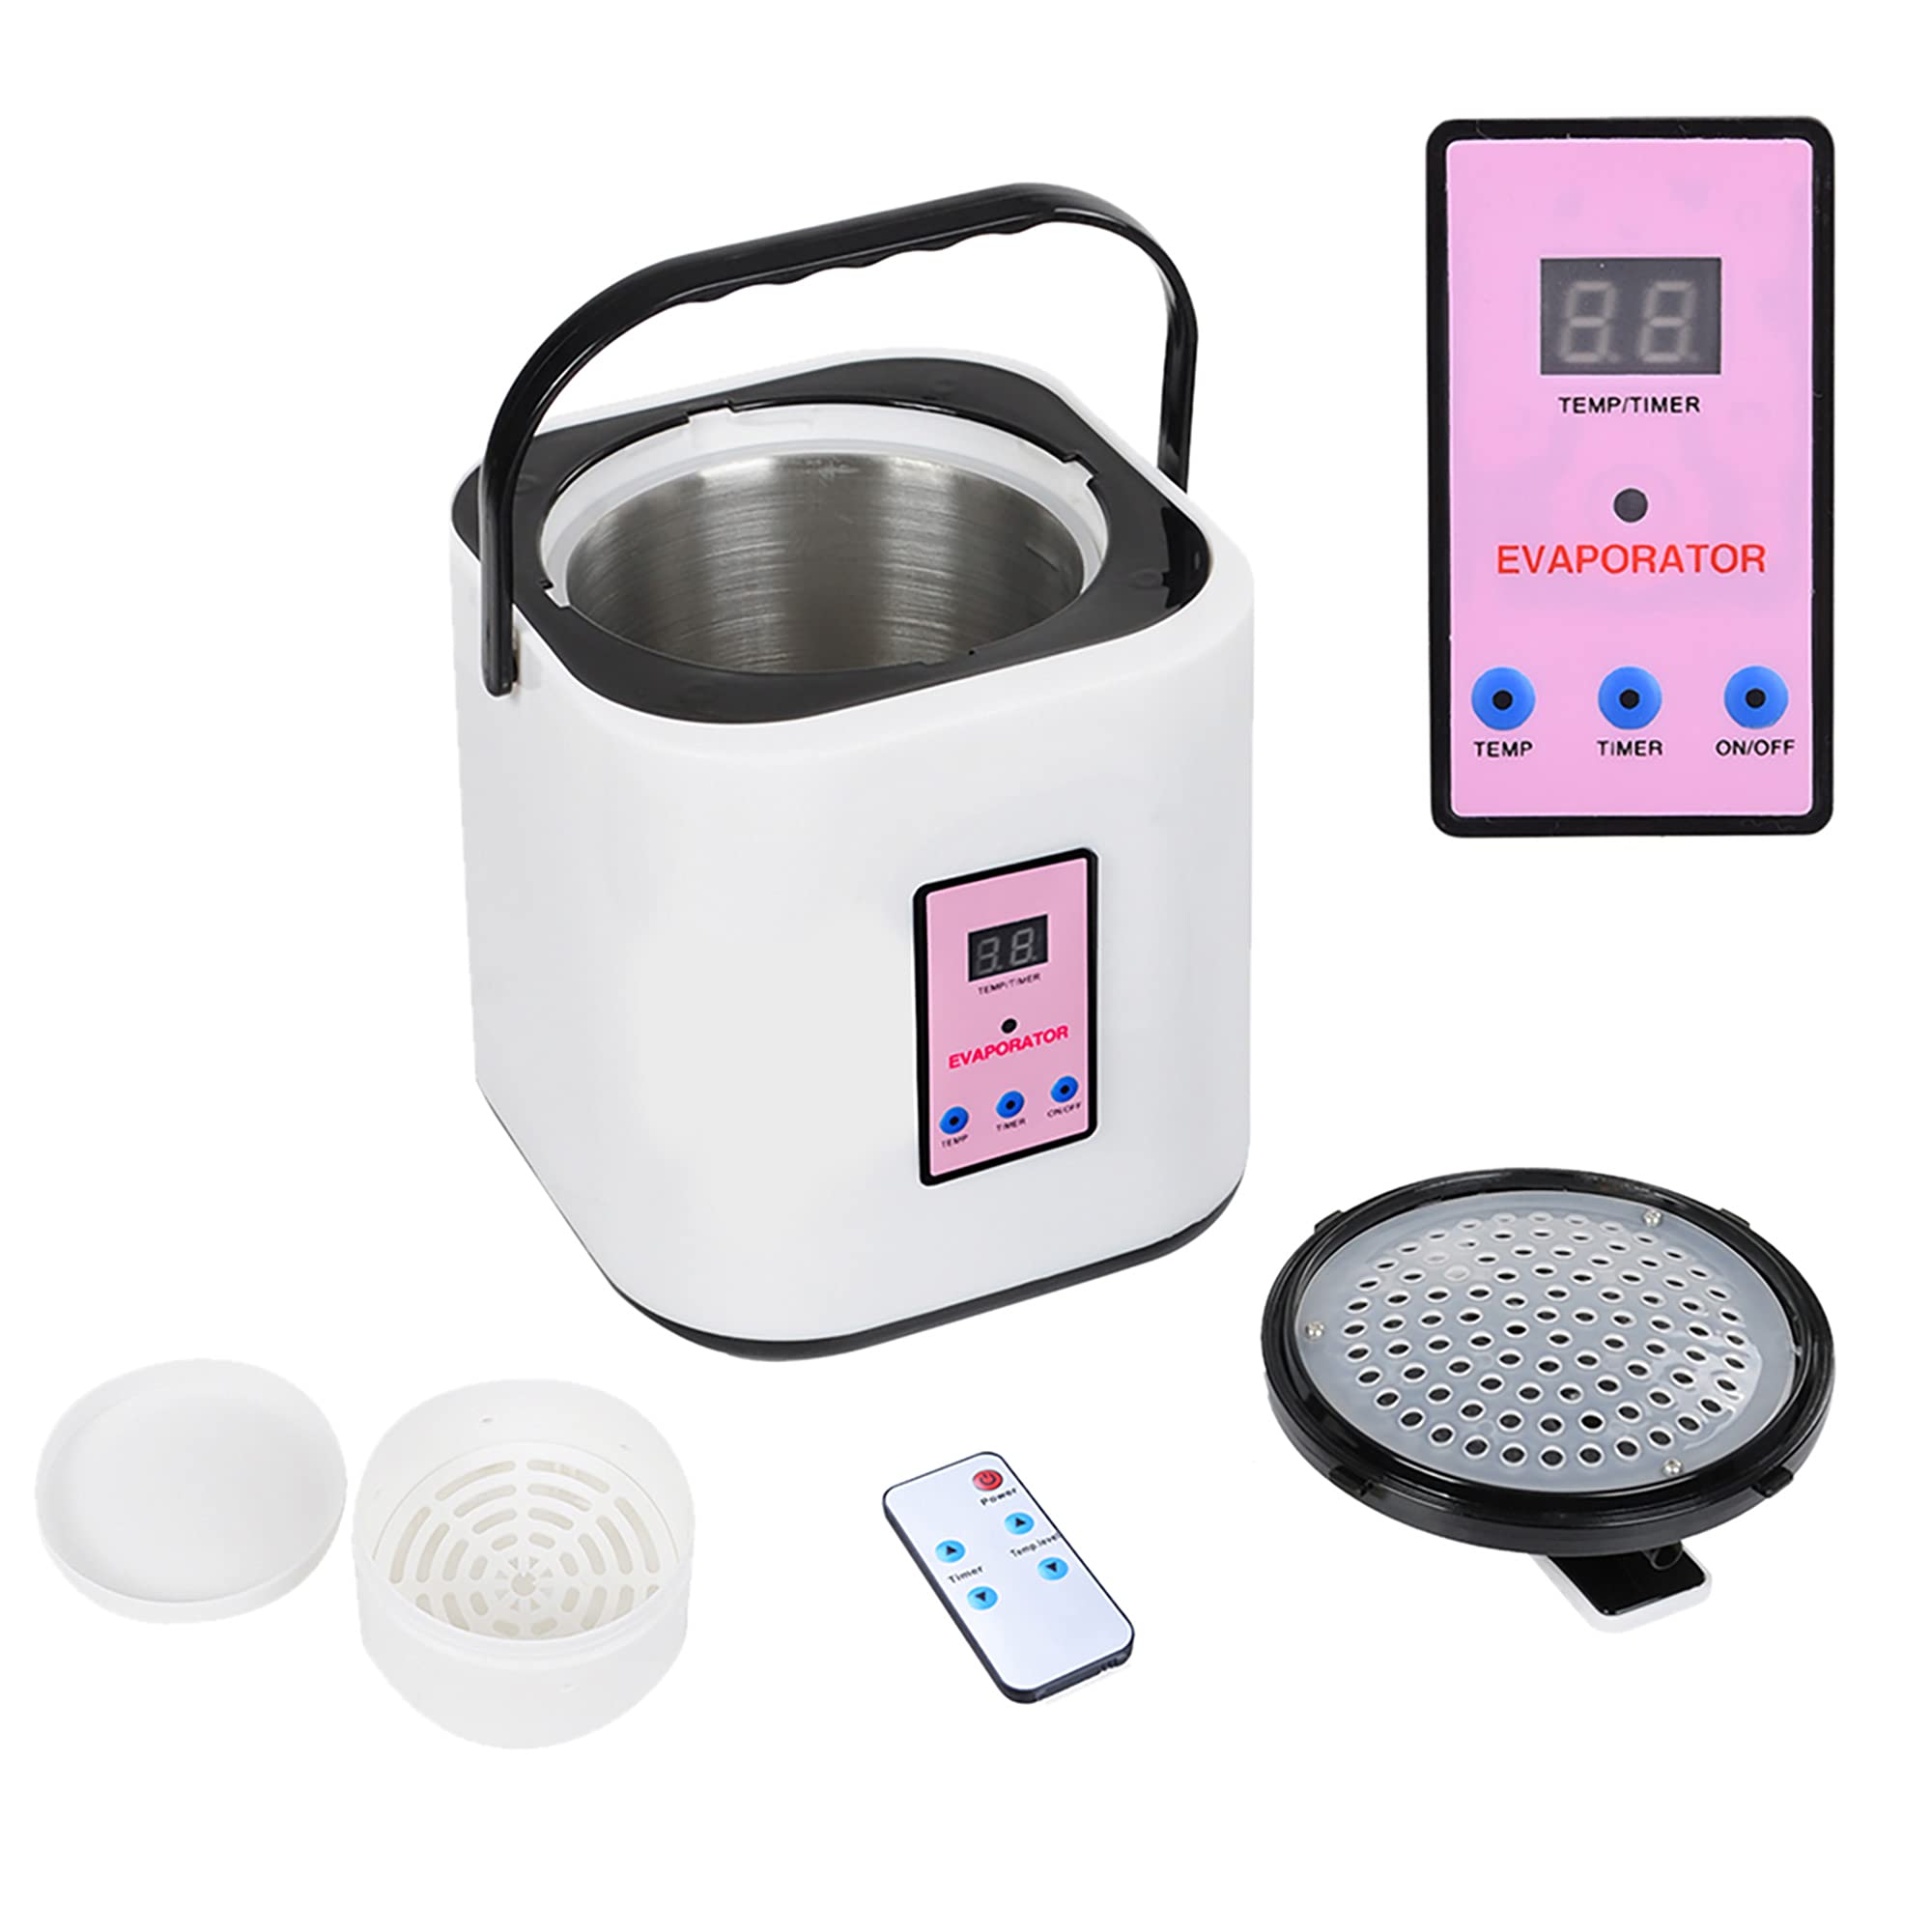 ZeHuoGe 2L Portable Sauna Steamer Pot, Generator for Steam Saunas Replacement Steamer with Herbal Box for Portable Sauna Tent 9-Level Temperature Adjustment & 6-Level time Setting Digital Display